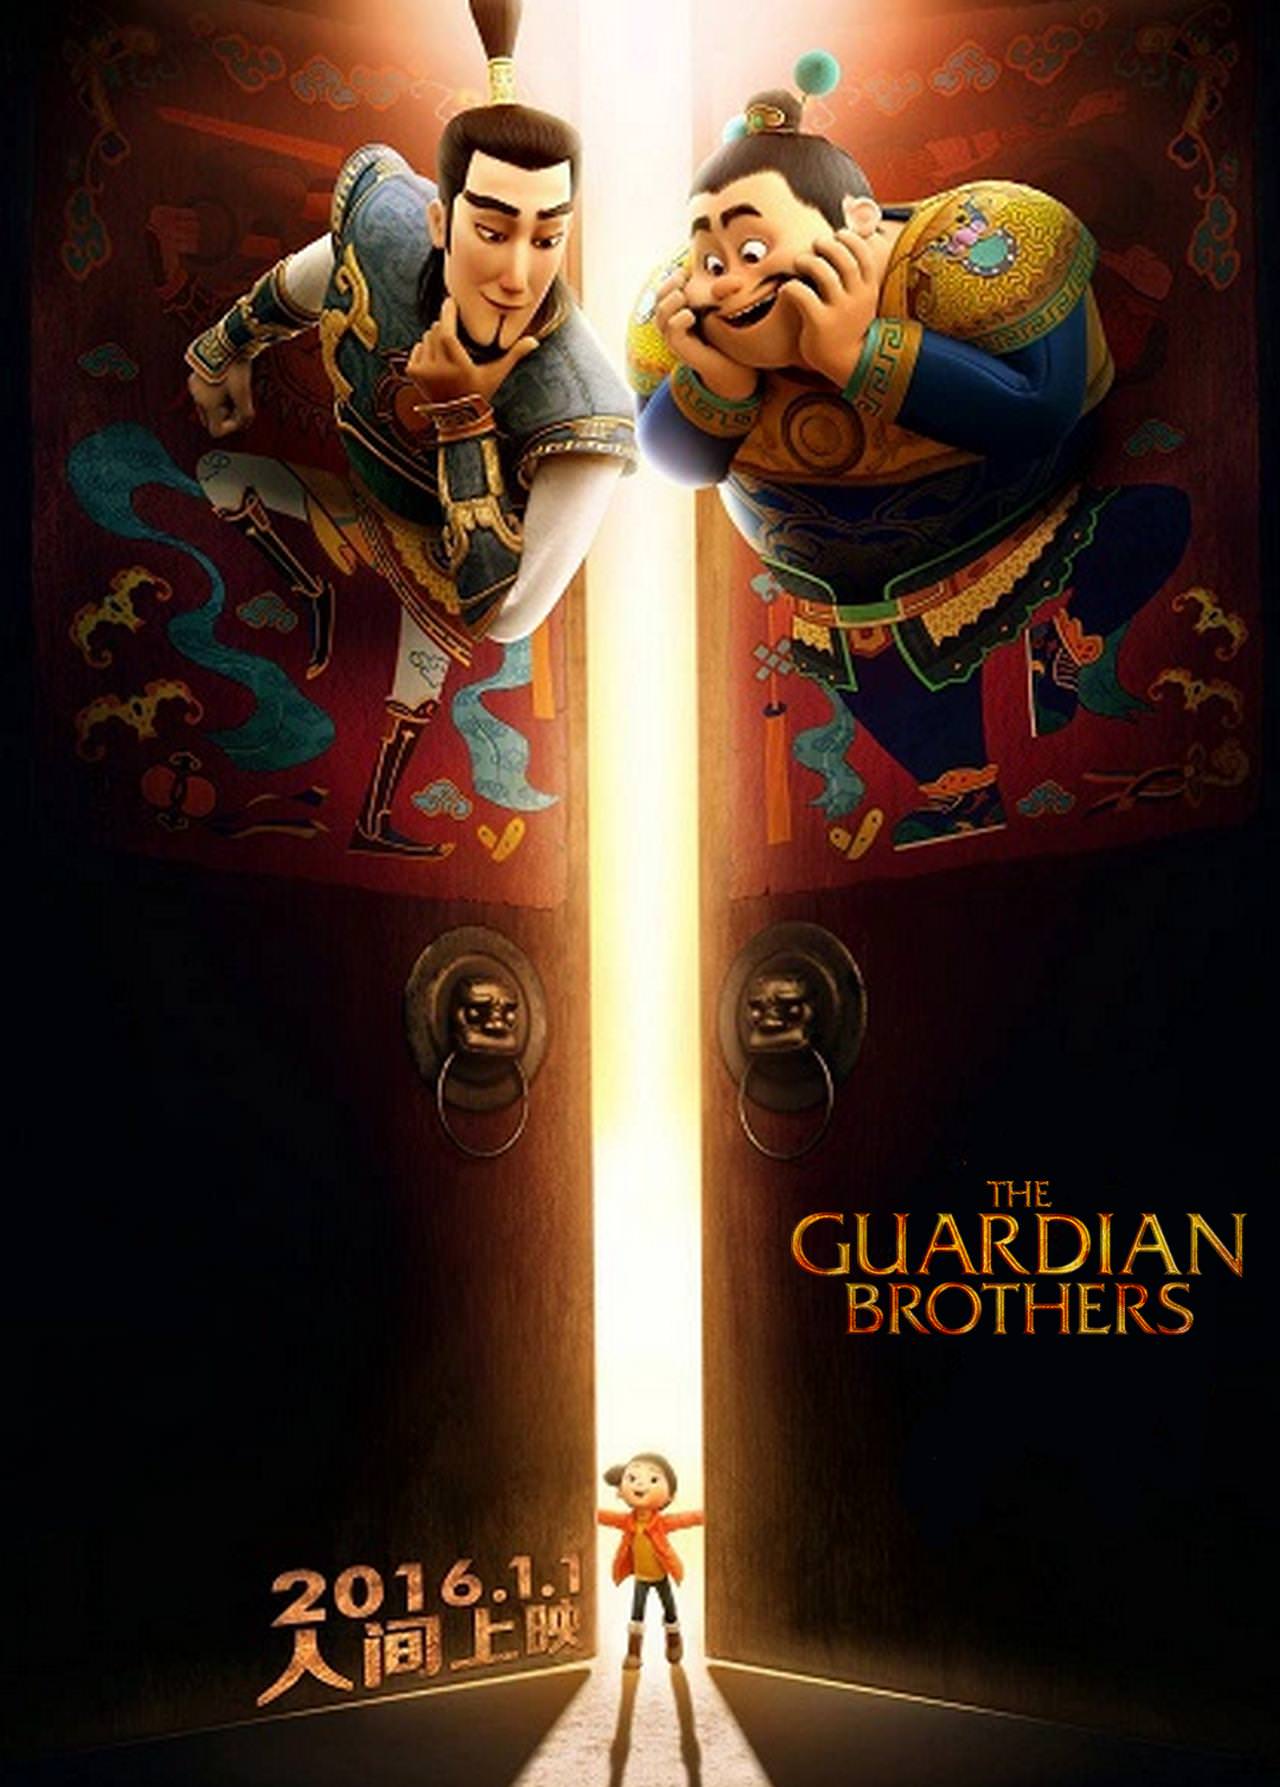 Regarder The Guardian Brothers en streaming complet